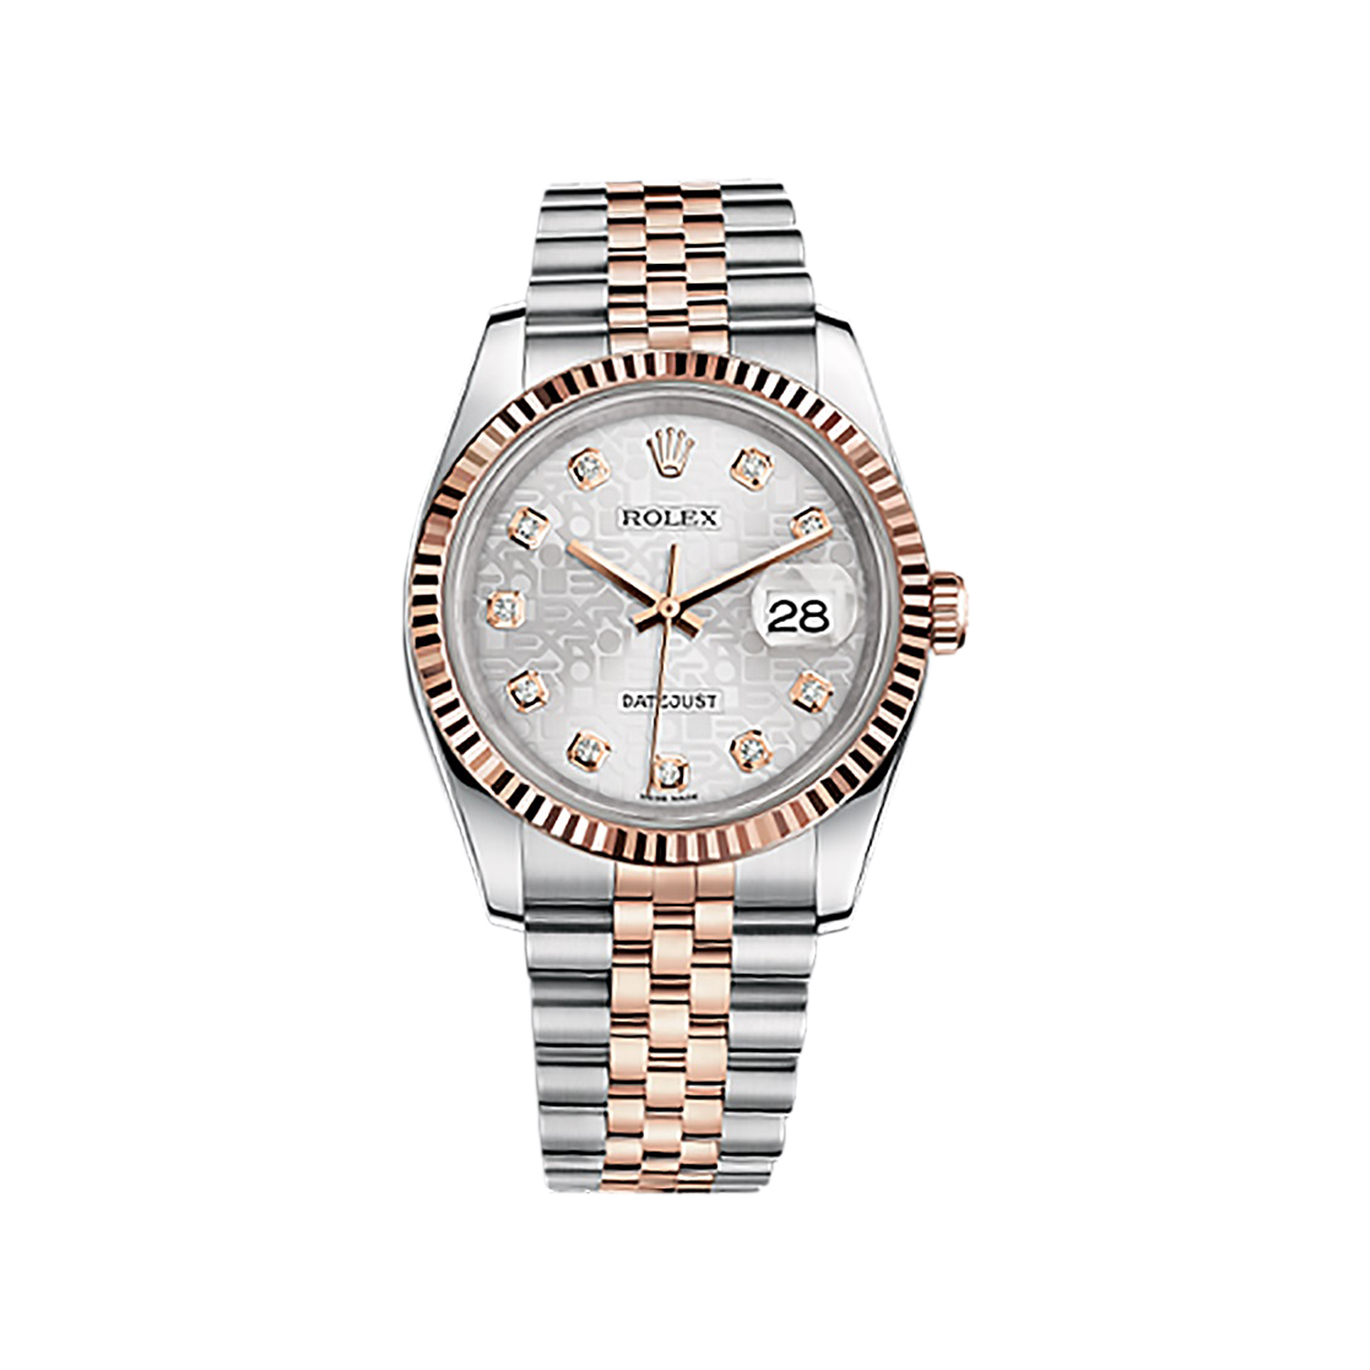 Datejust 36 116231 Rose Gold & Stainless Steel Watch (Silver Jubilee Design Set with Diamonds)